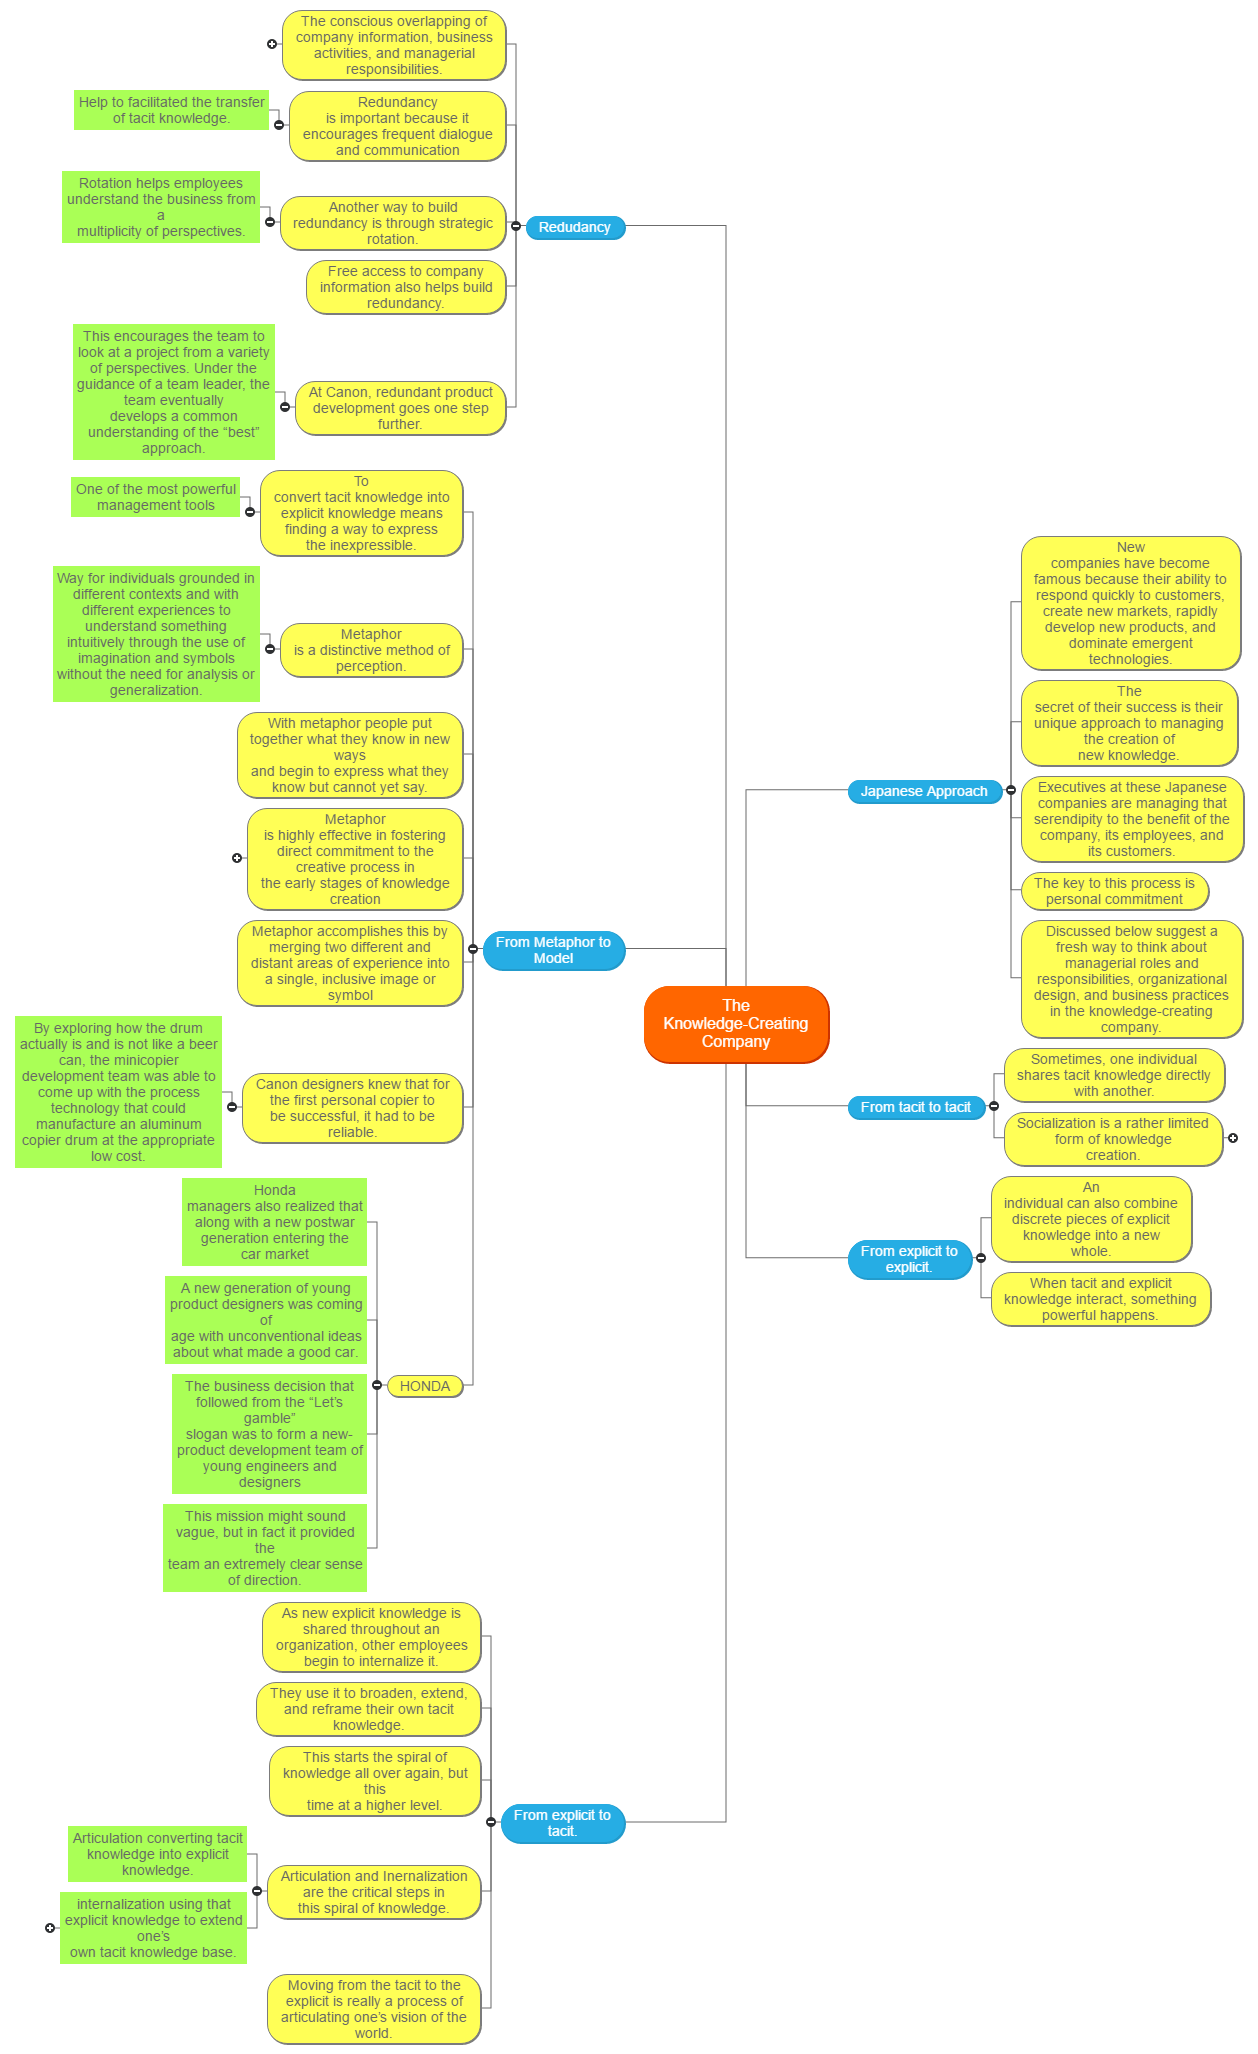 The Knowledge-Creating Company Mind Map